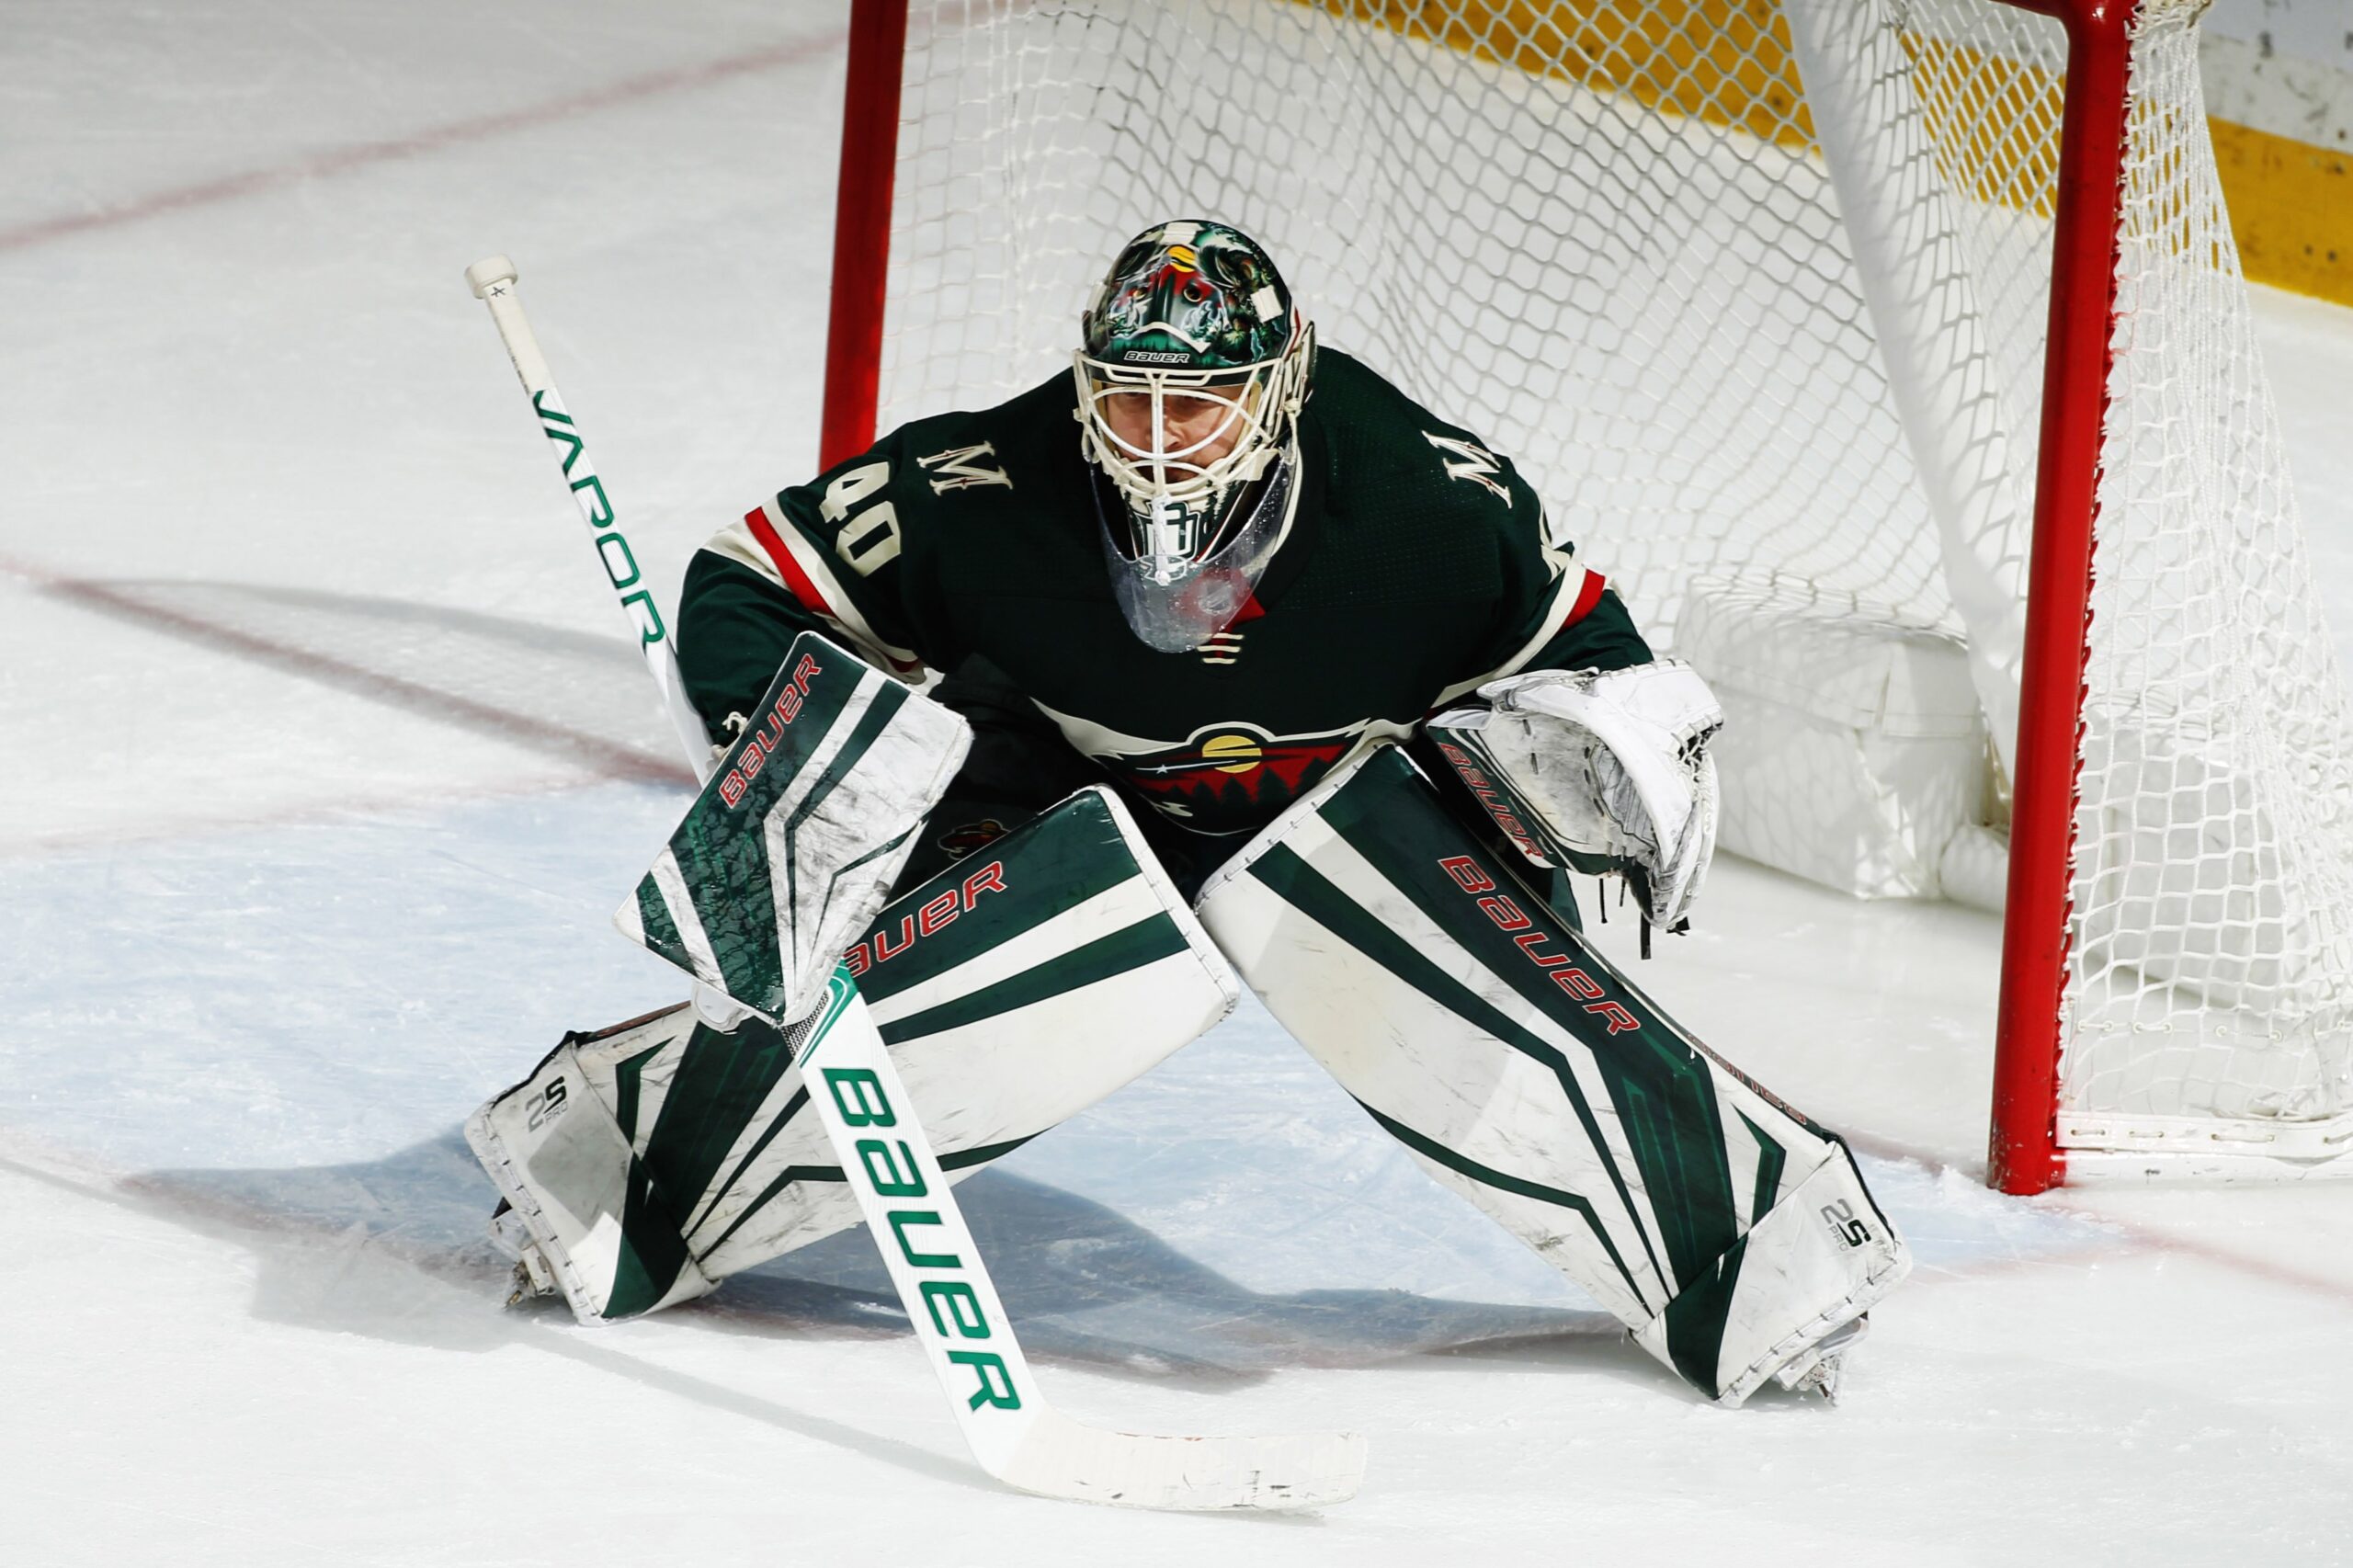 Did Devan Dubnyk Retire- What Is His Net Worth? Meet His Wife Jennifer Dubnyk And Their Family